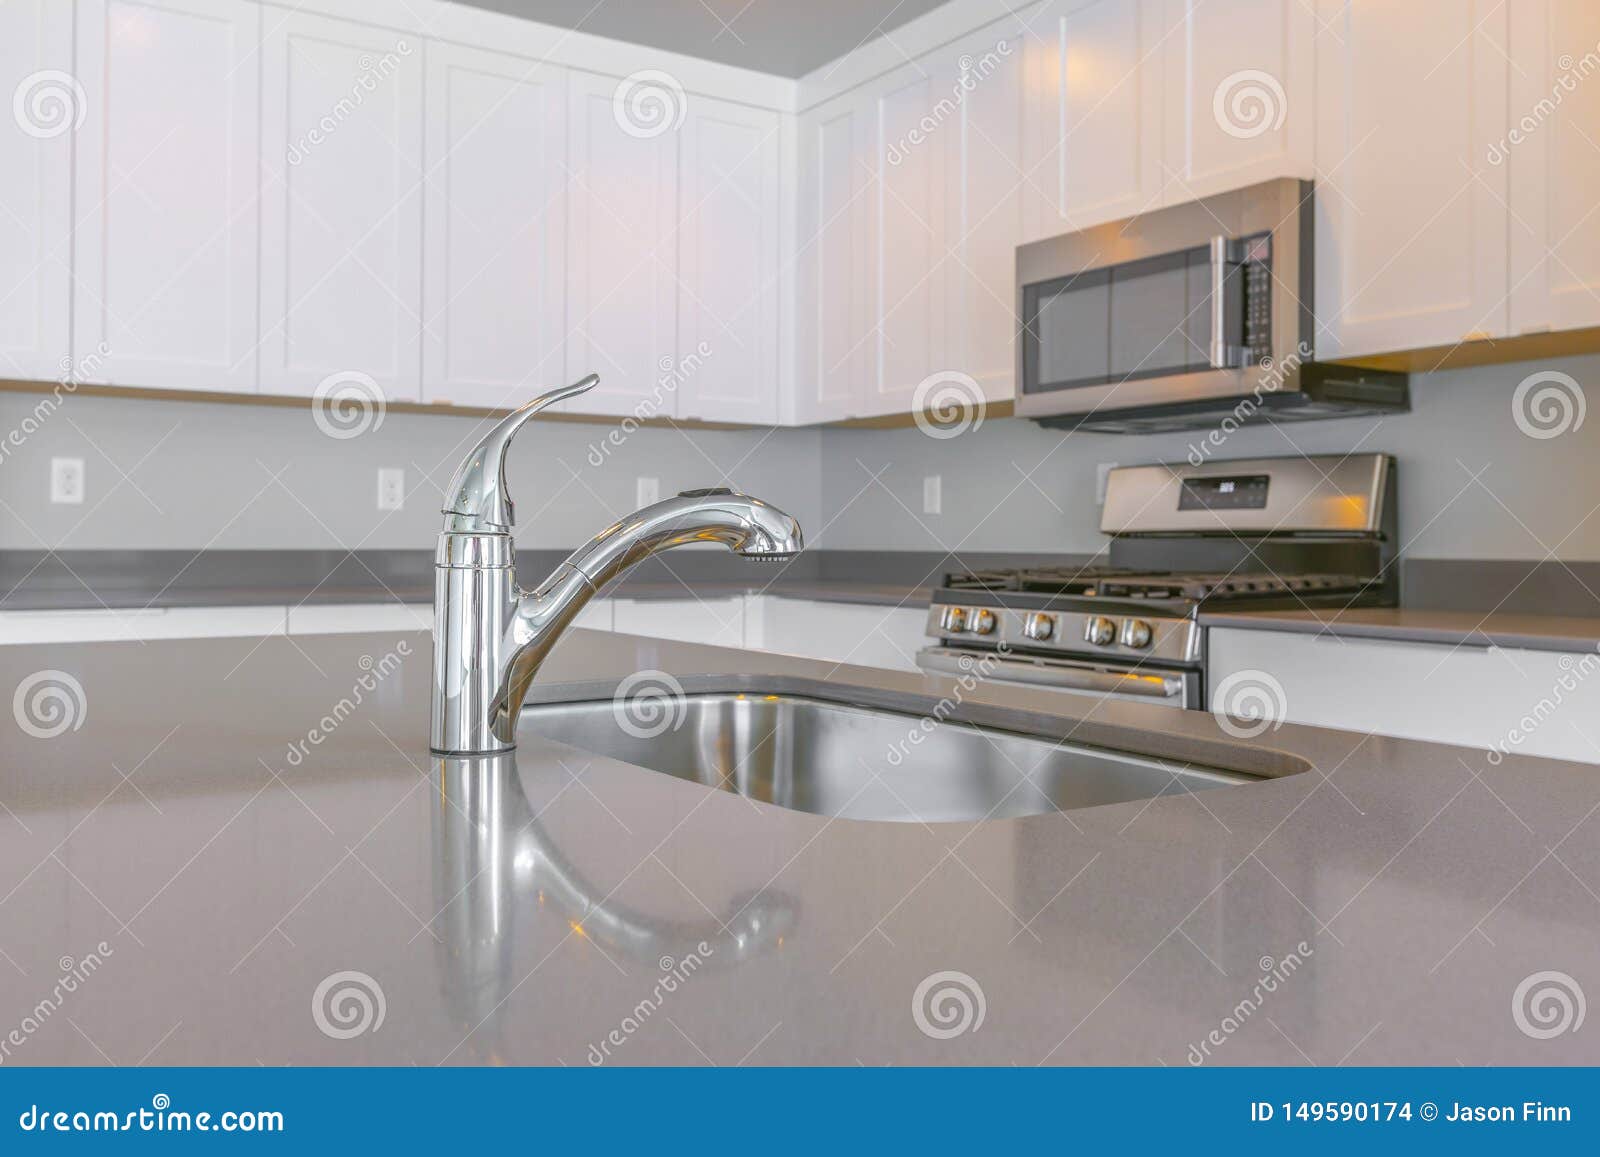 Close Up of a Glossy Countertop with Faucet and Sink Inside a Modern ...